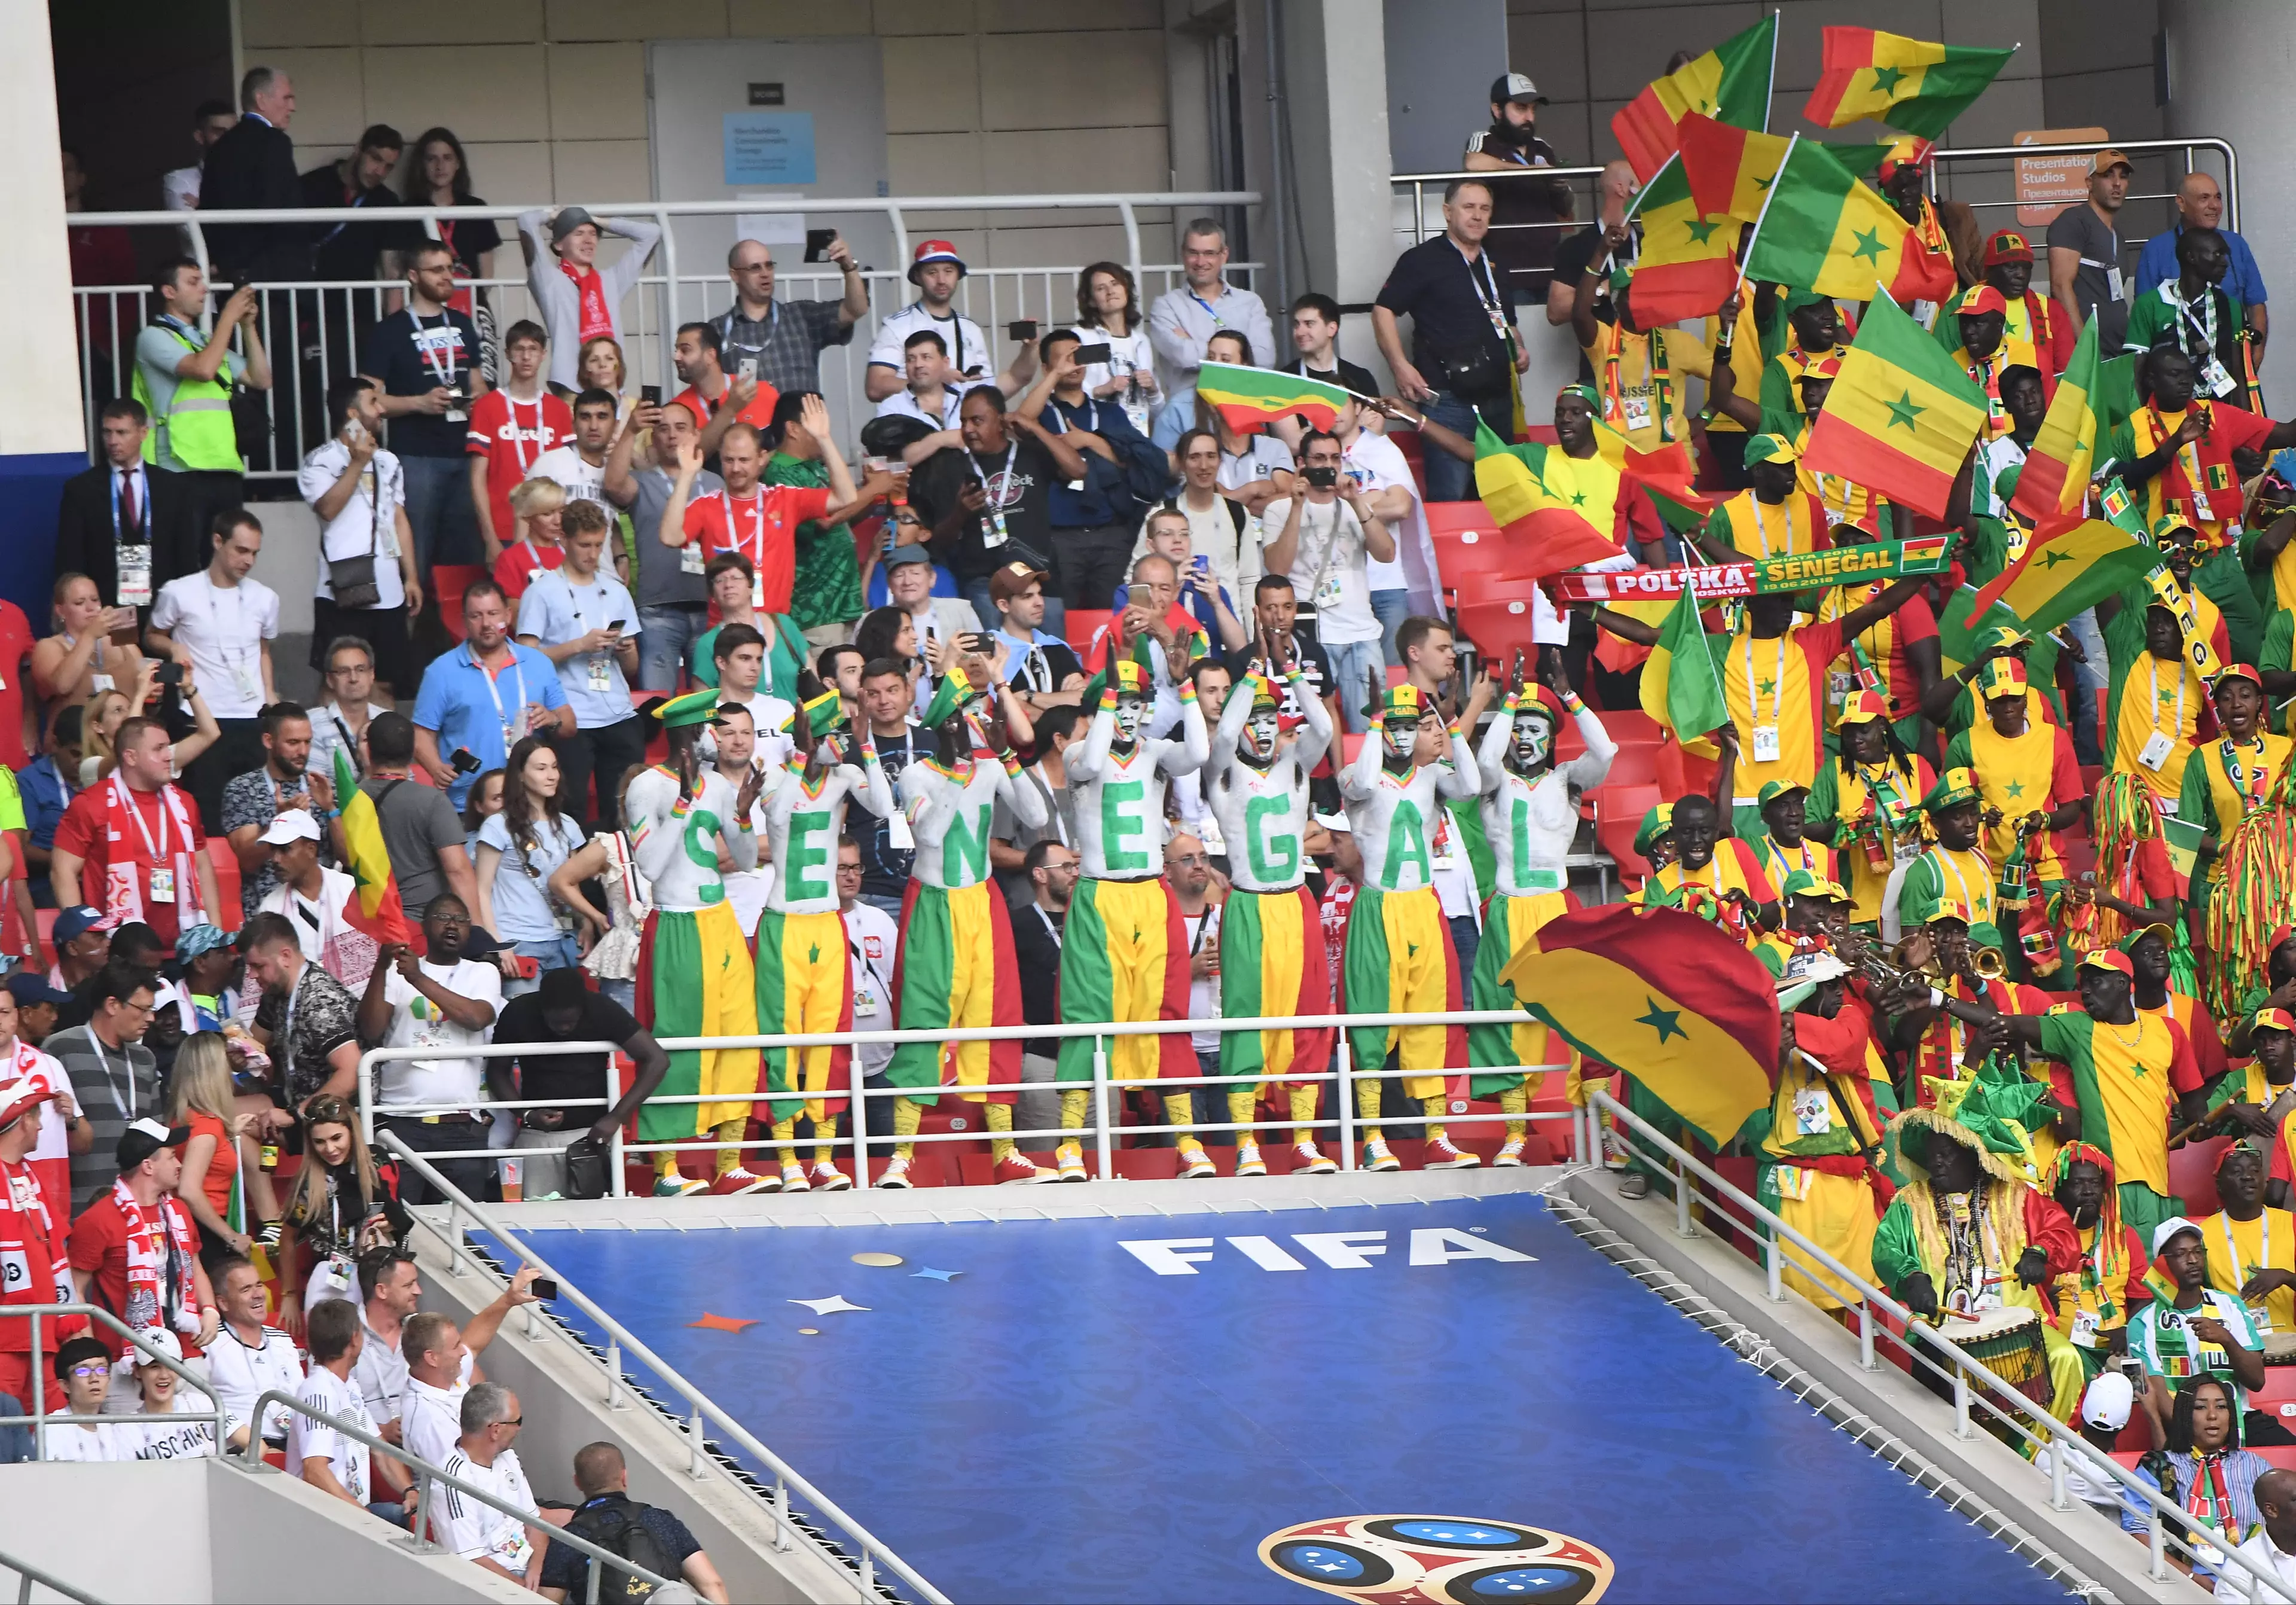 Senegal fans at the World Cup. Image: PA